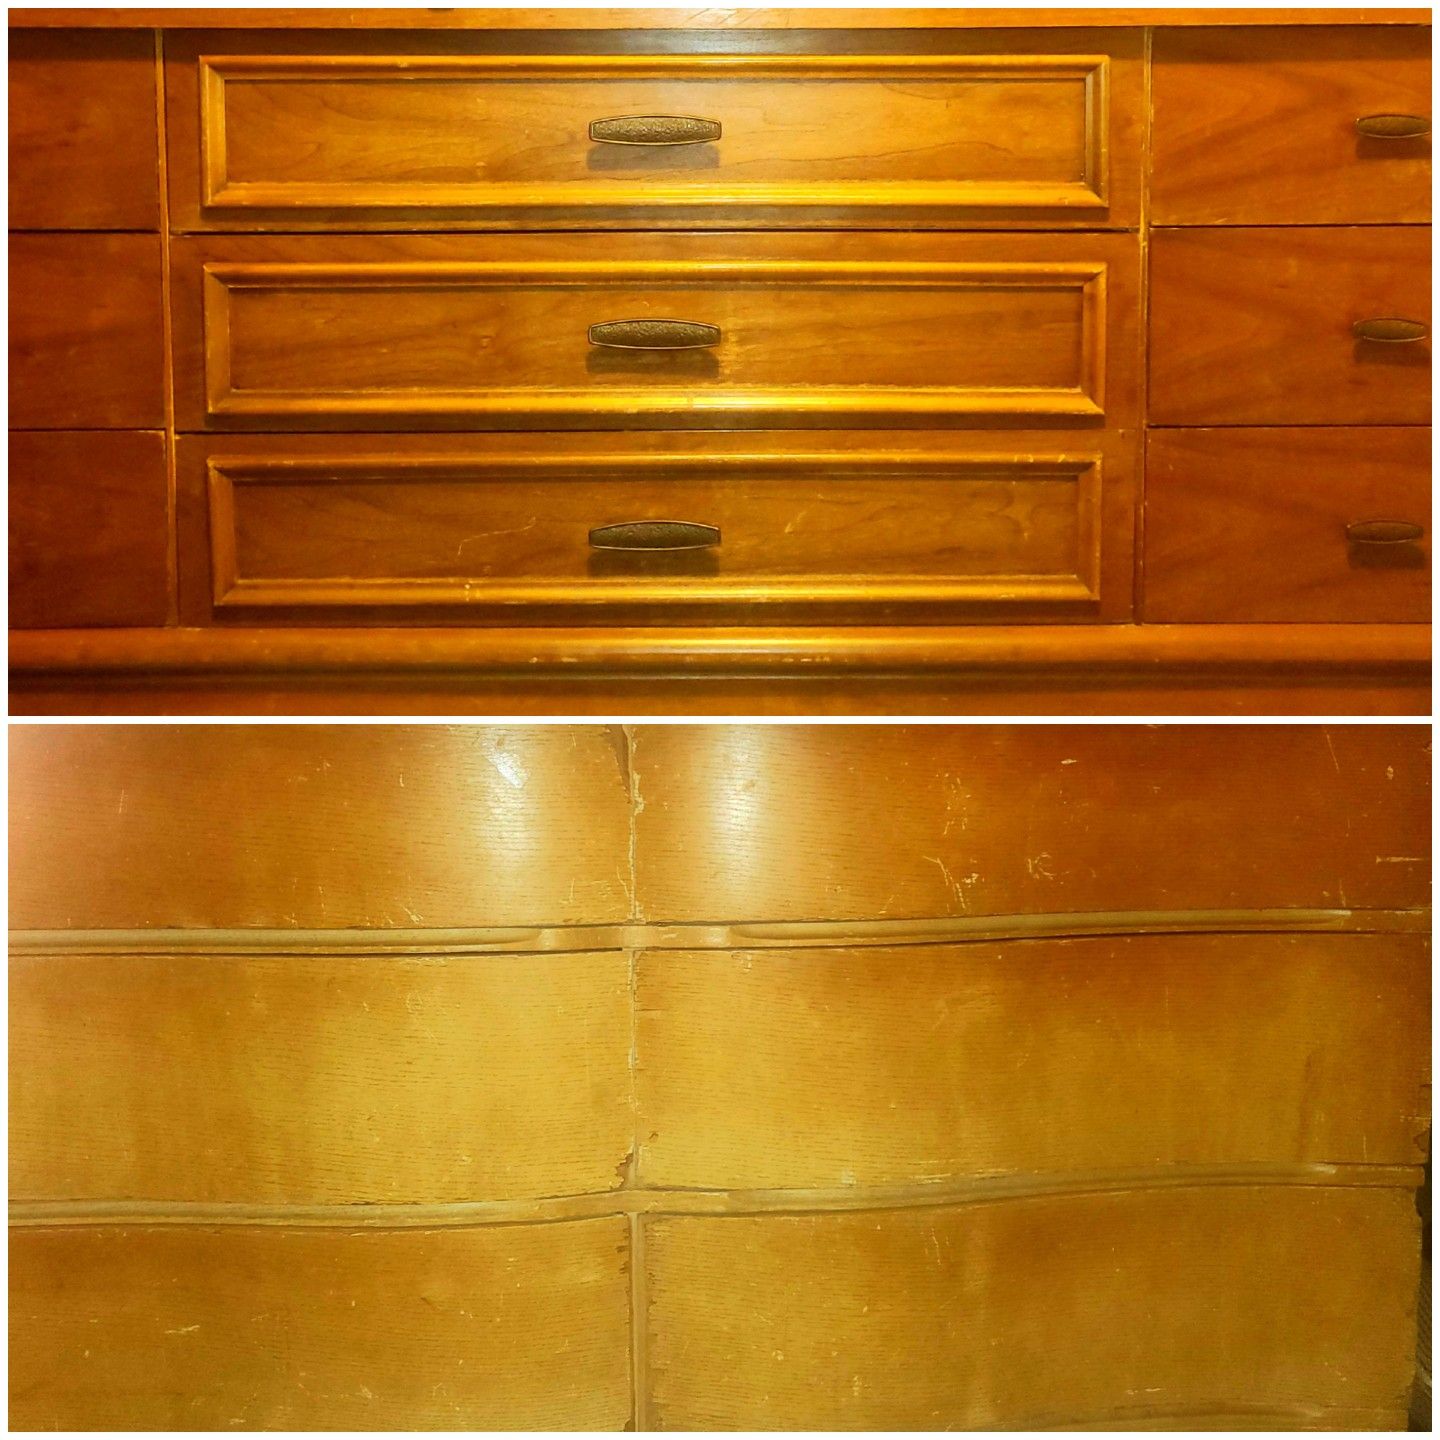 Buffet Style Dressers for Sale! $50 a Piece!